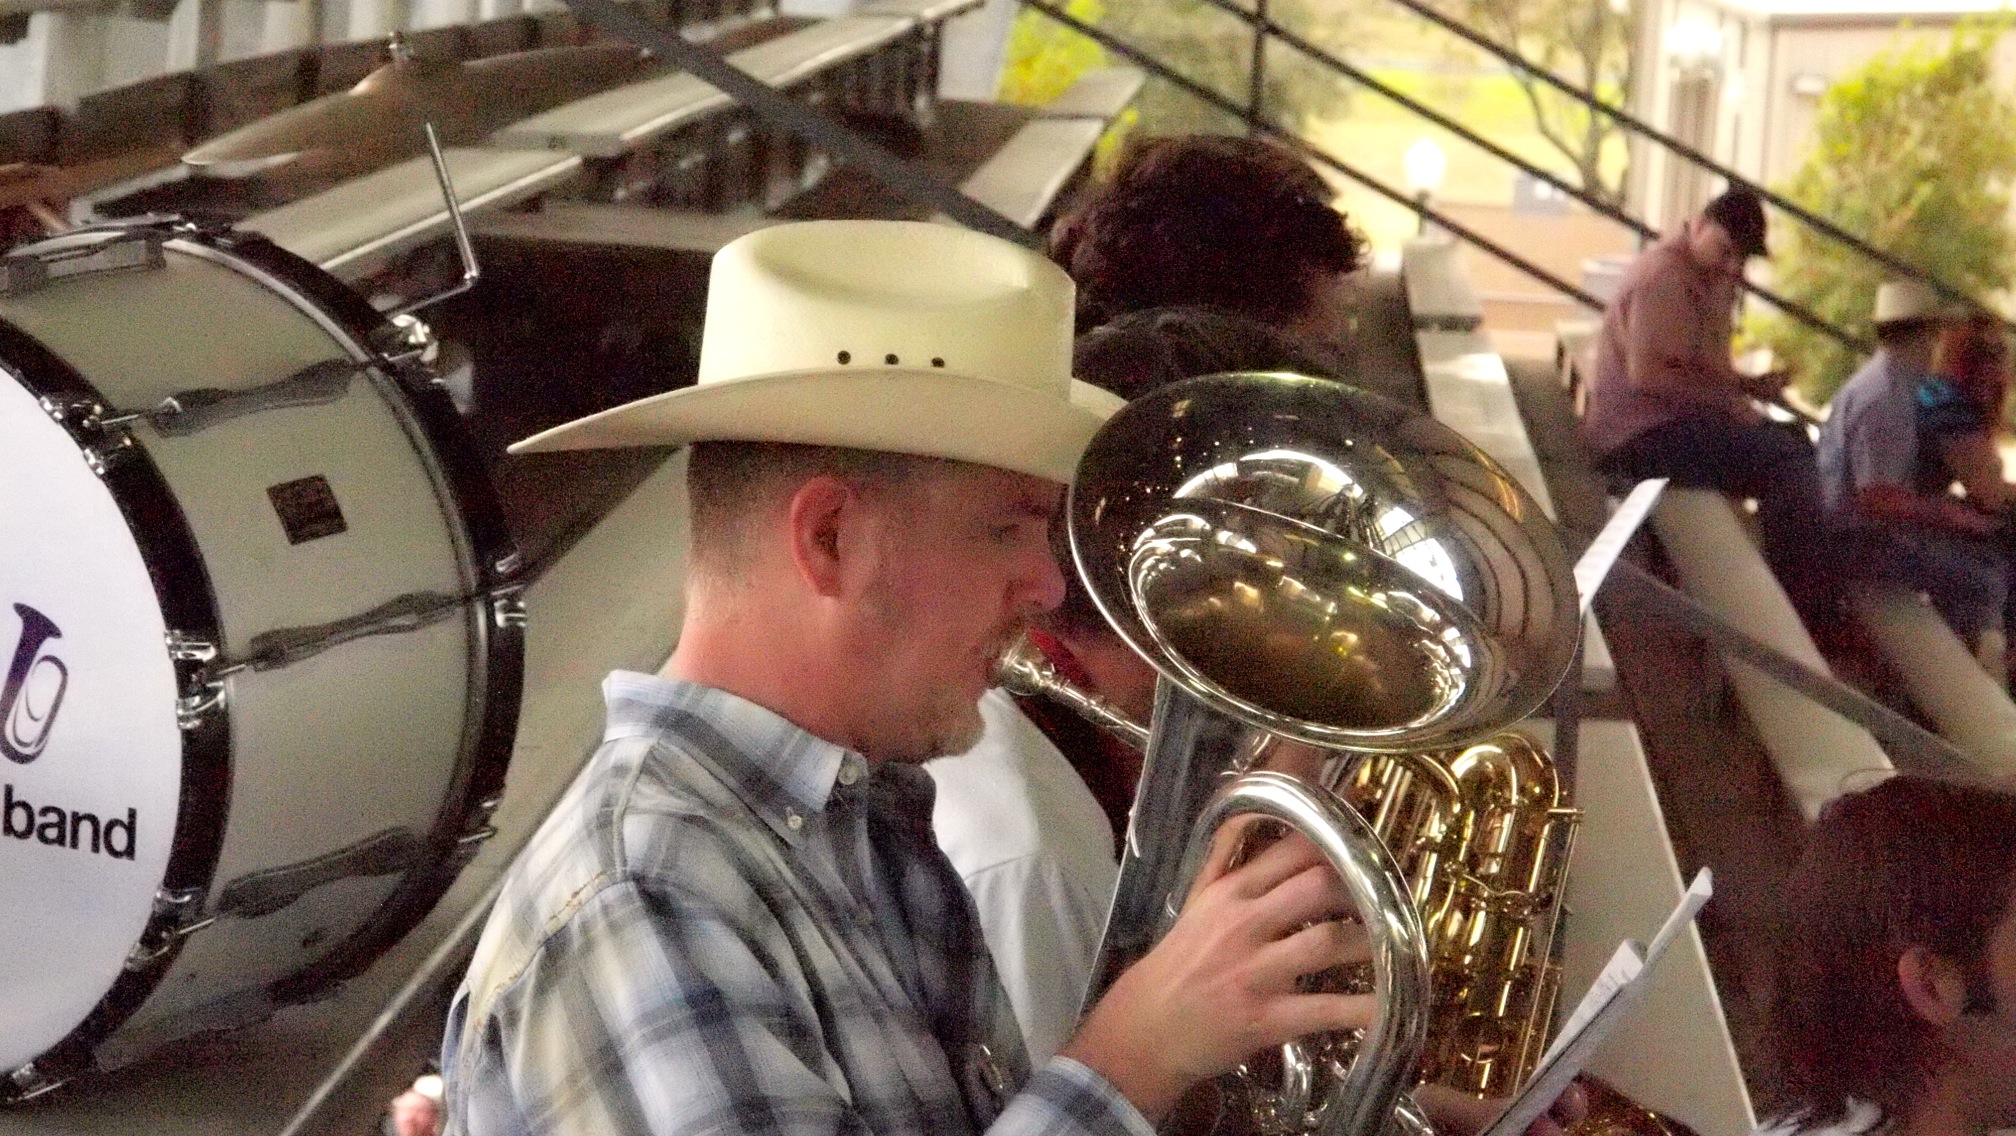 a man with a hat plays the trumpet in front of people in a band